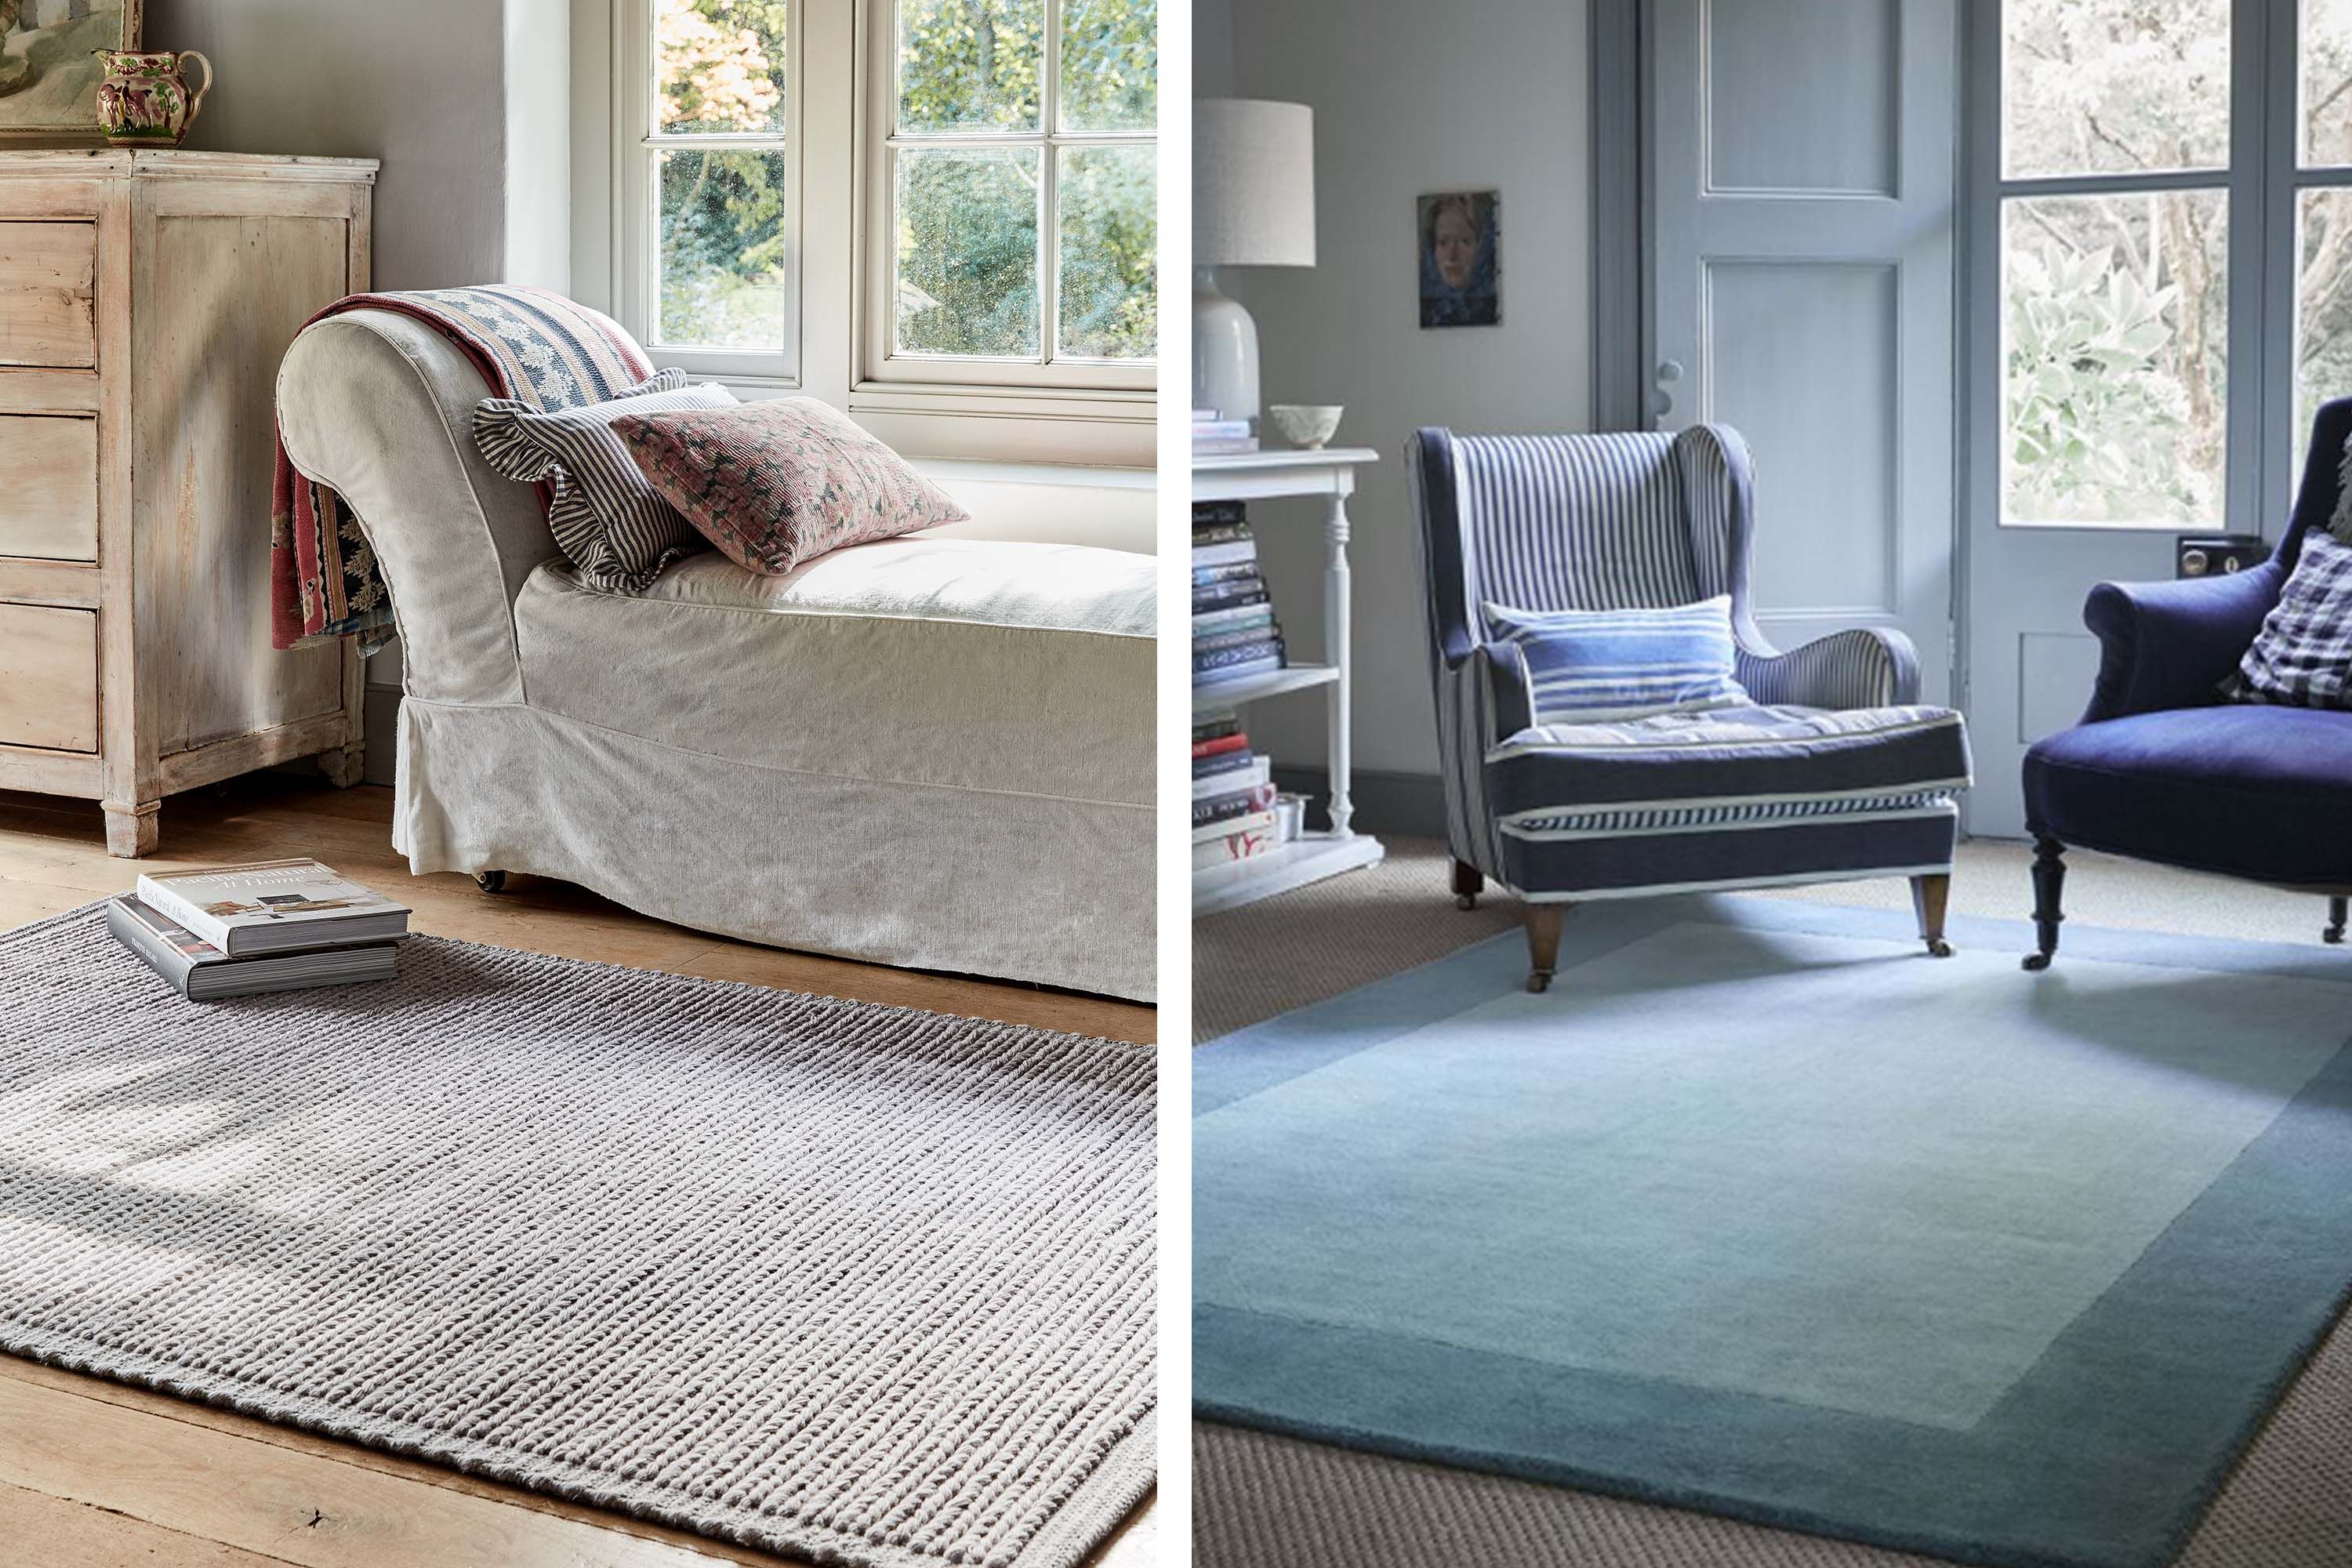 Signature Pure Wool Carpet Collections